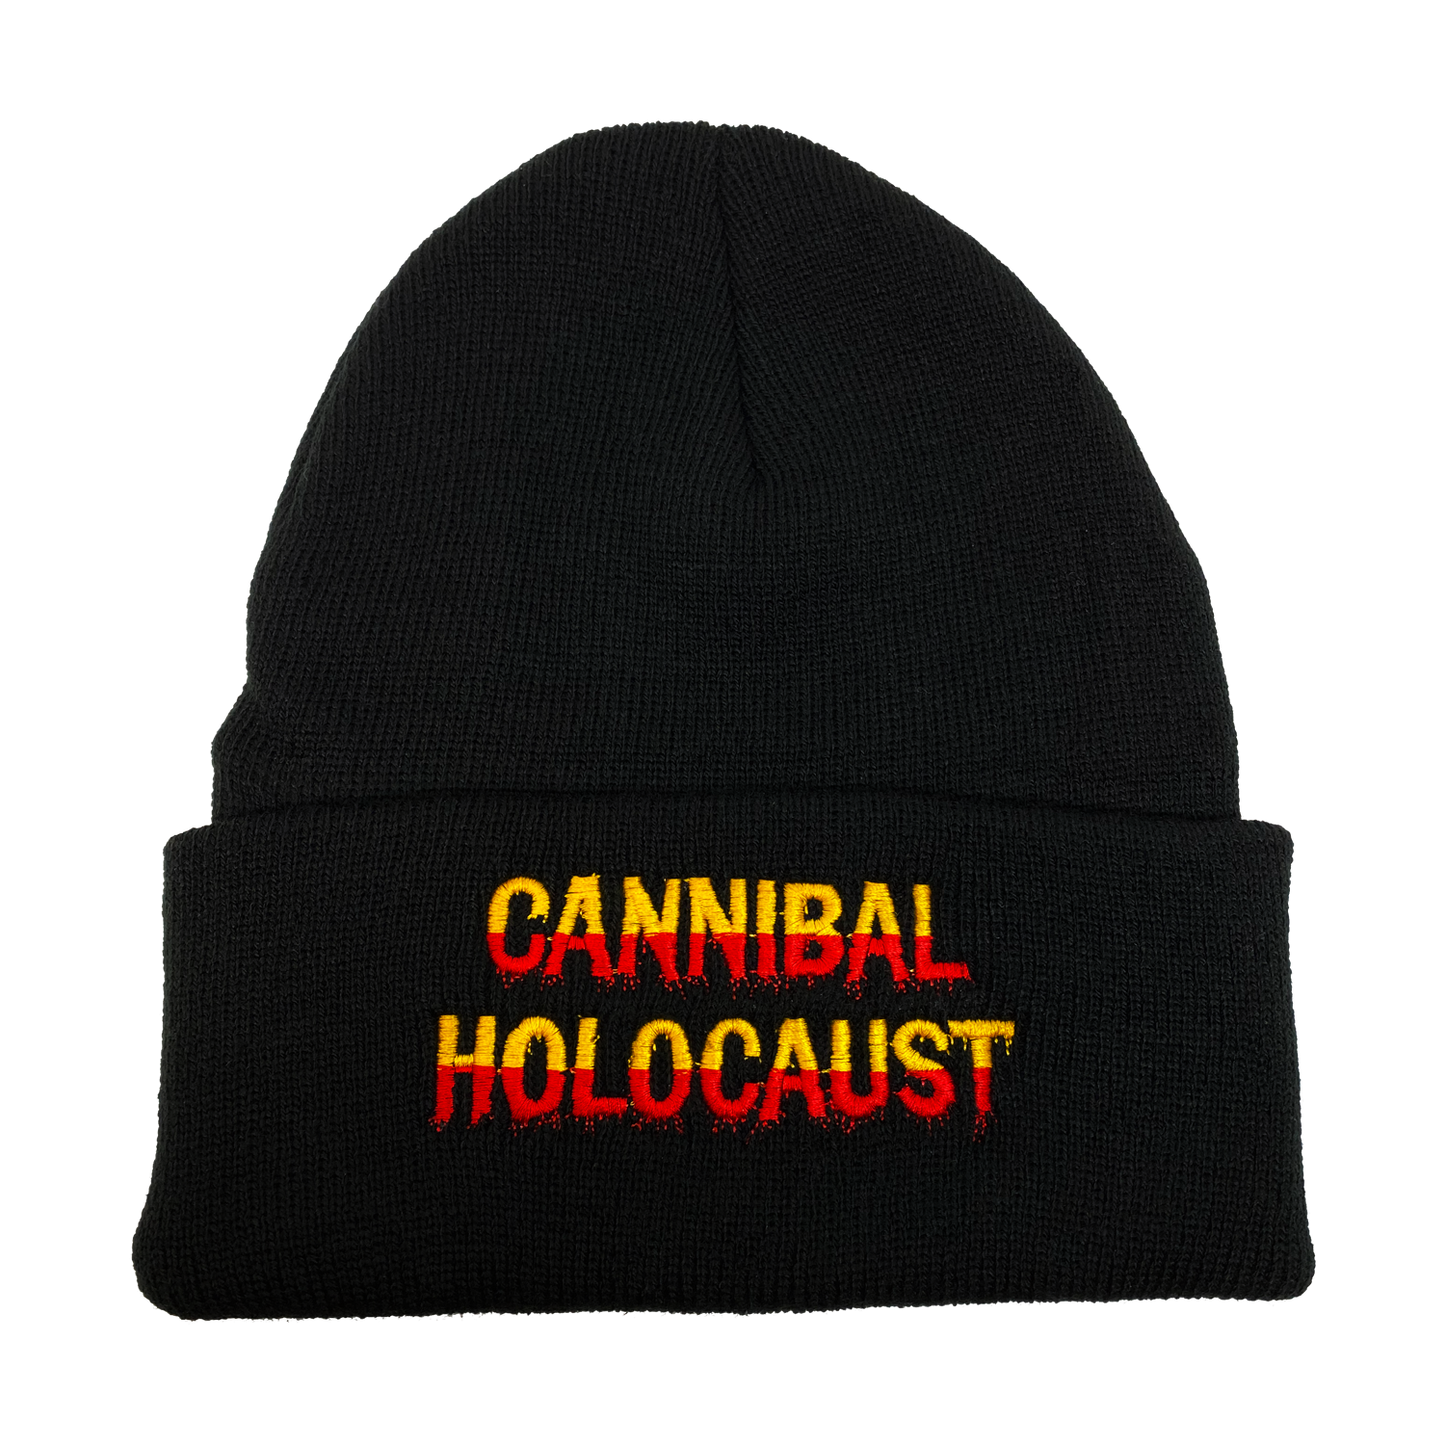 Cannibal Holocaust Embroidered Beanie - UNMASKED Horror & Punk Patches and Decor